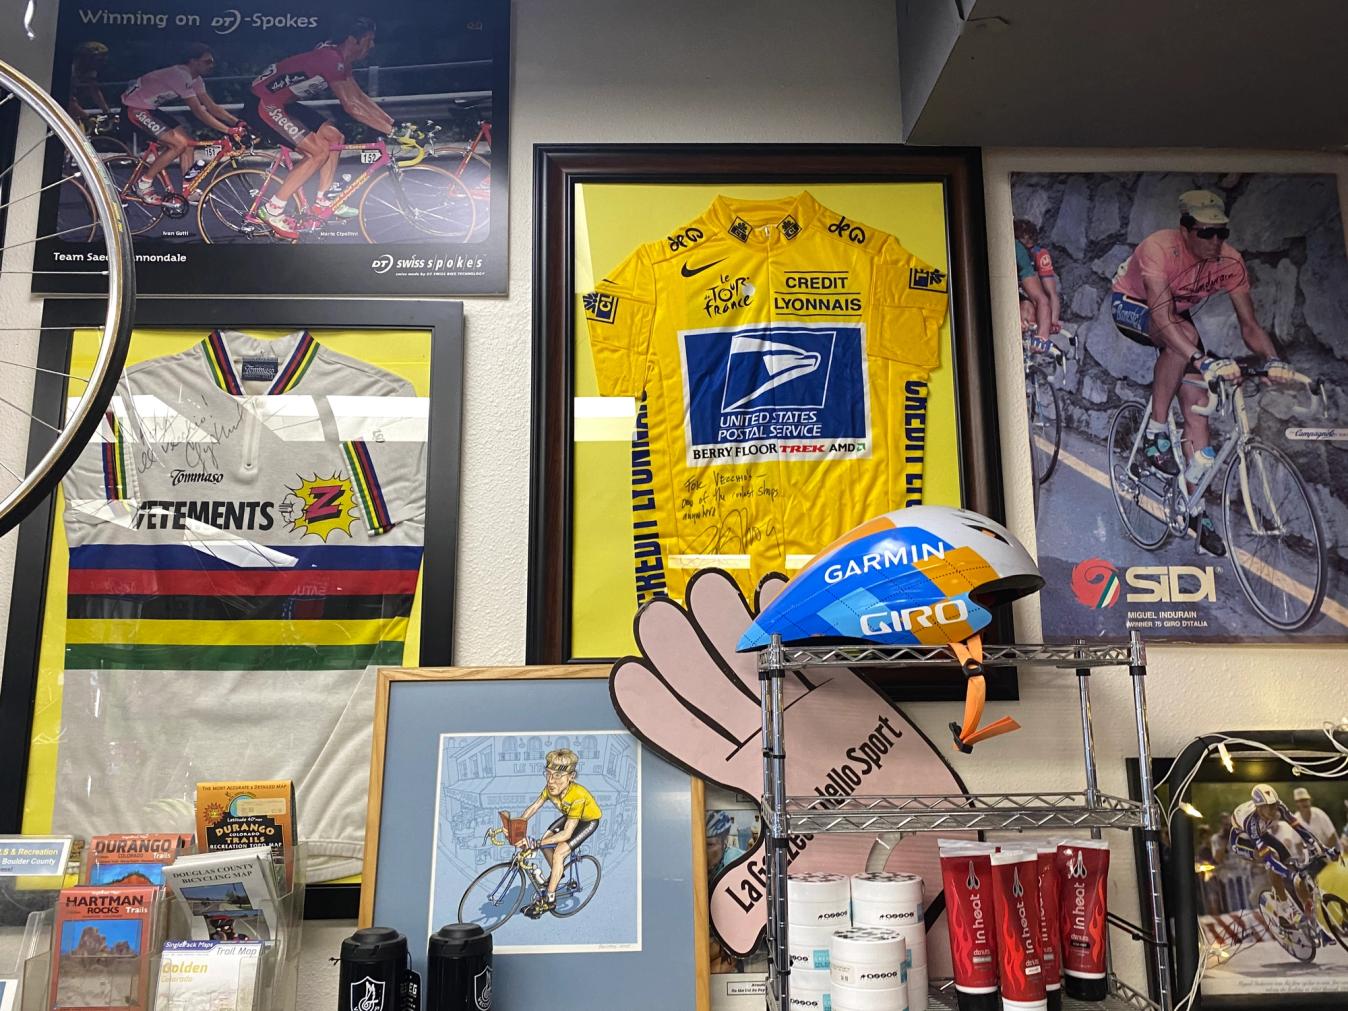 How would Greg LeMond and Lance Armstrong feel about having their signed jersey's next to each other? We can only guess